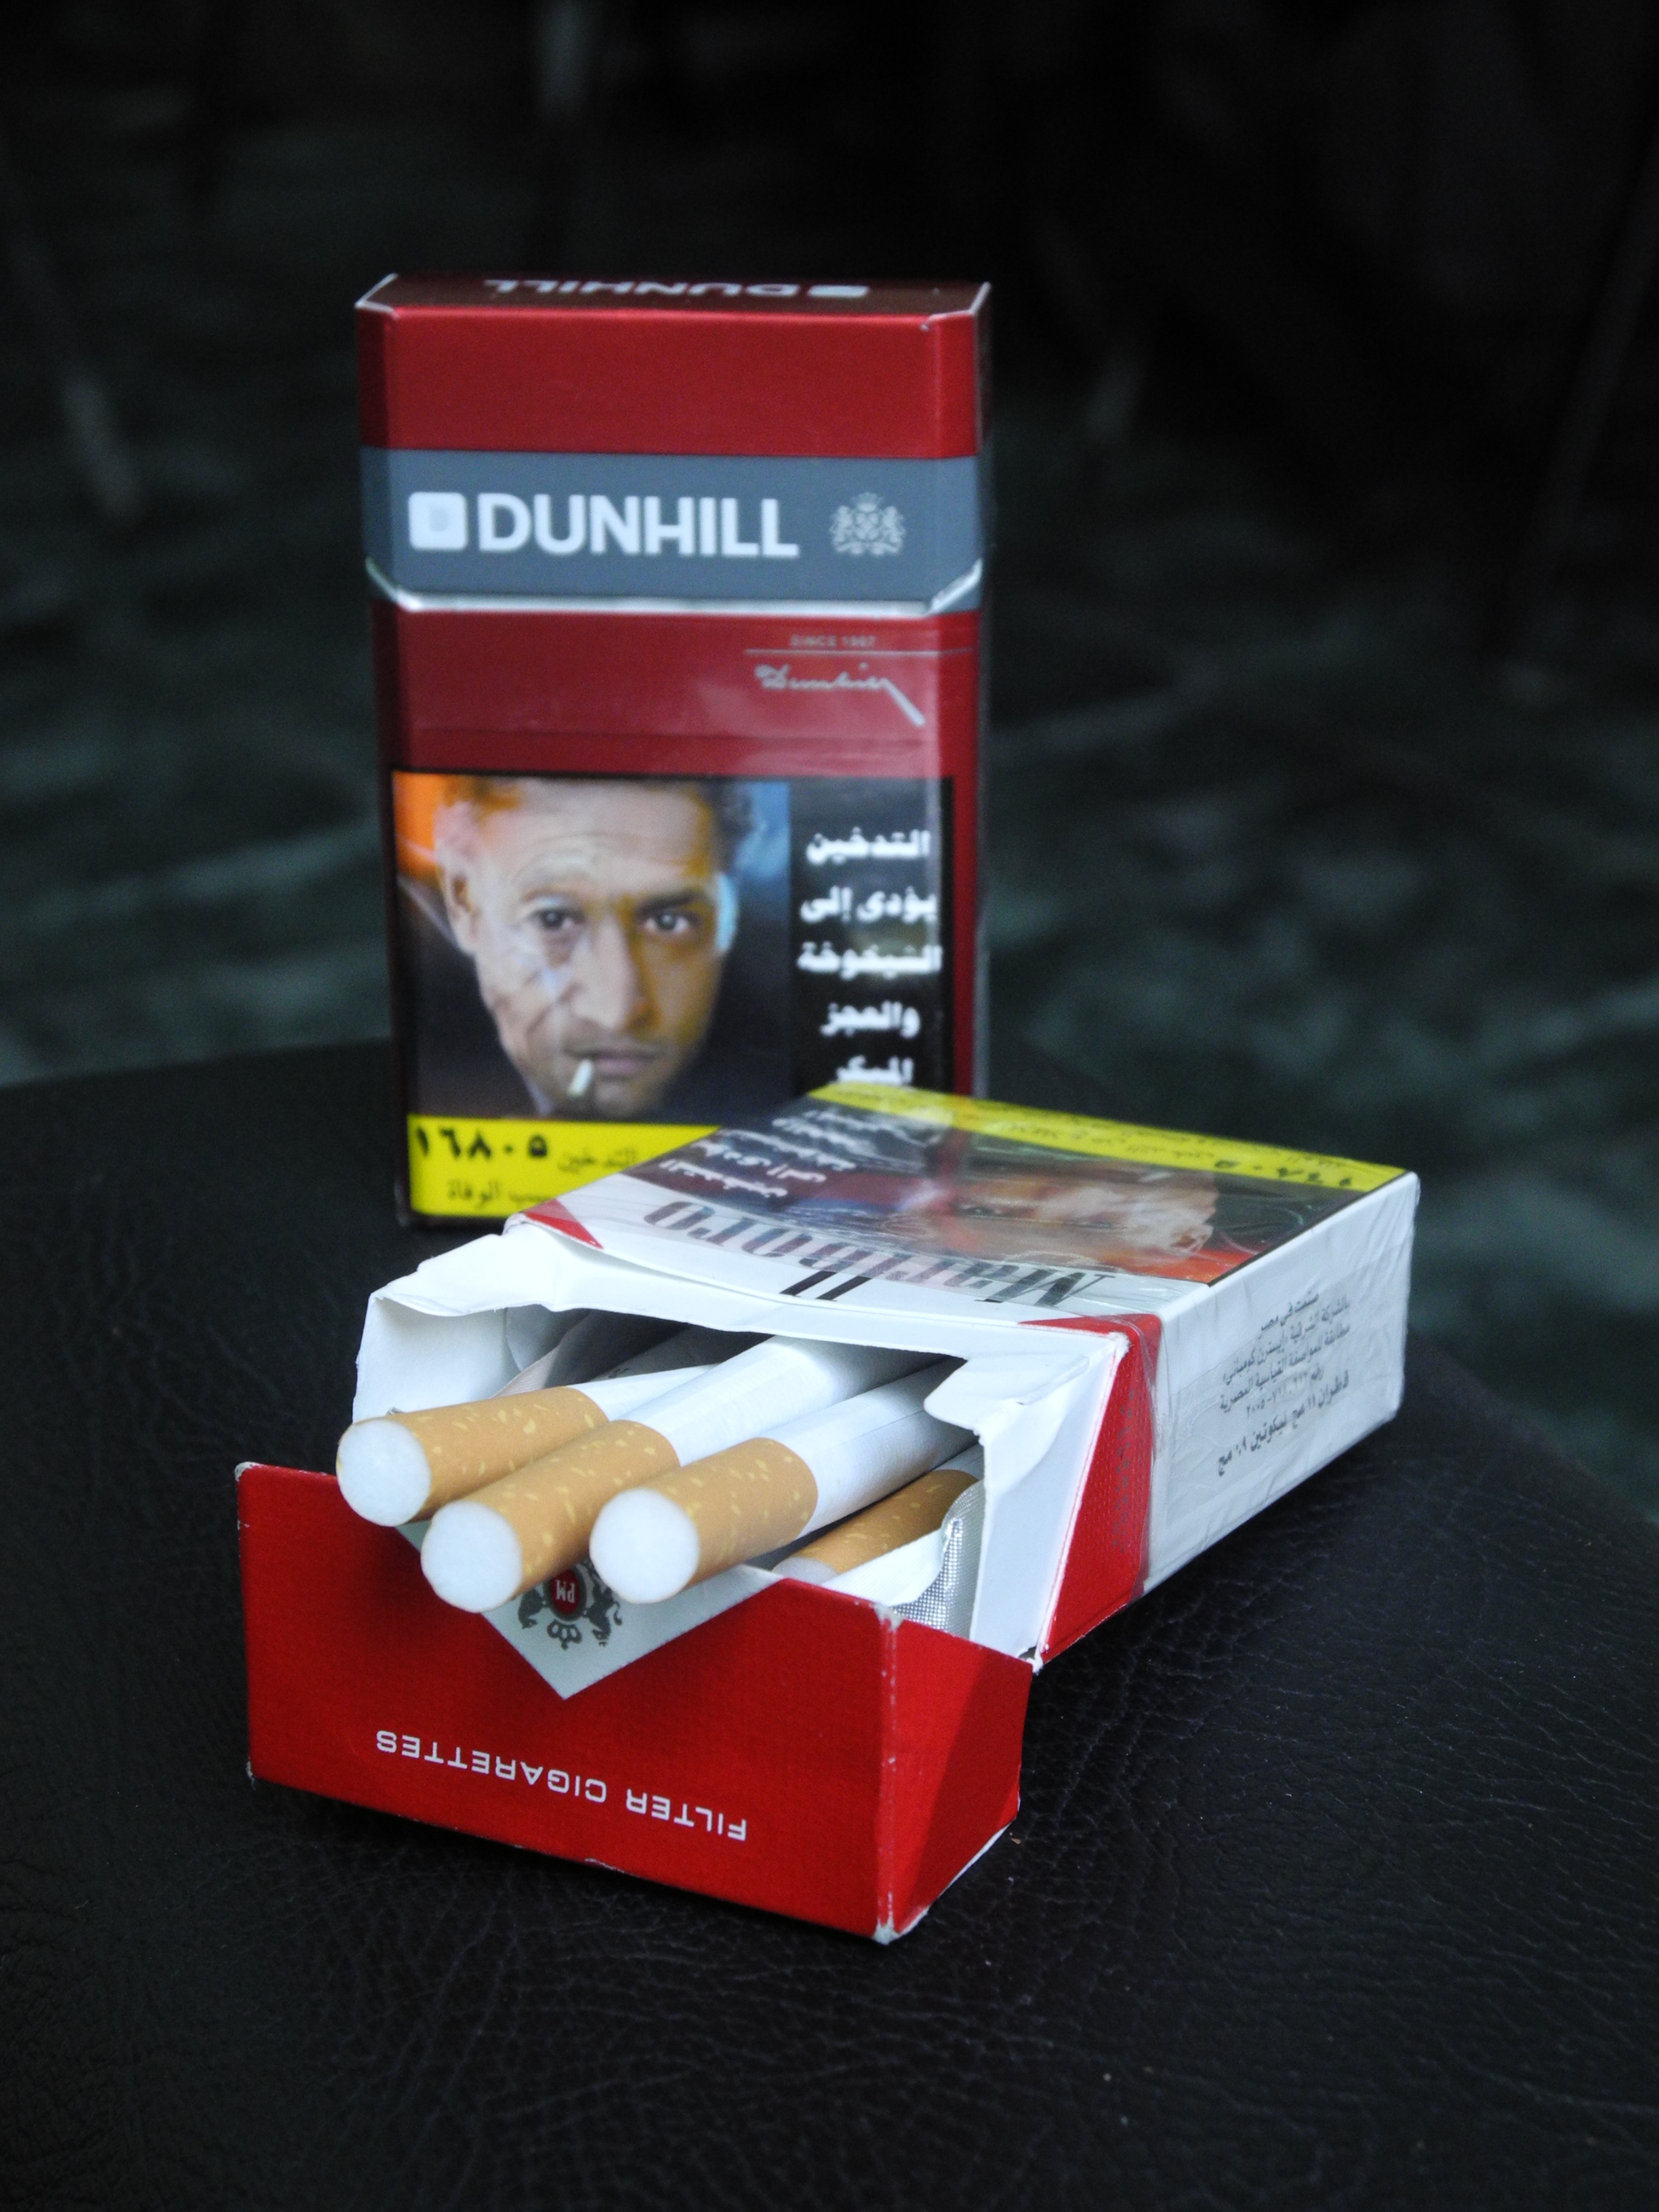 The head of the Tobacco Division at the FEI accuses the Government of singling out the industry, following proposed tax increases on tobacco products (Photo by Laurence Underhill)